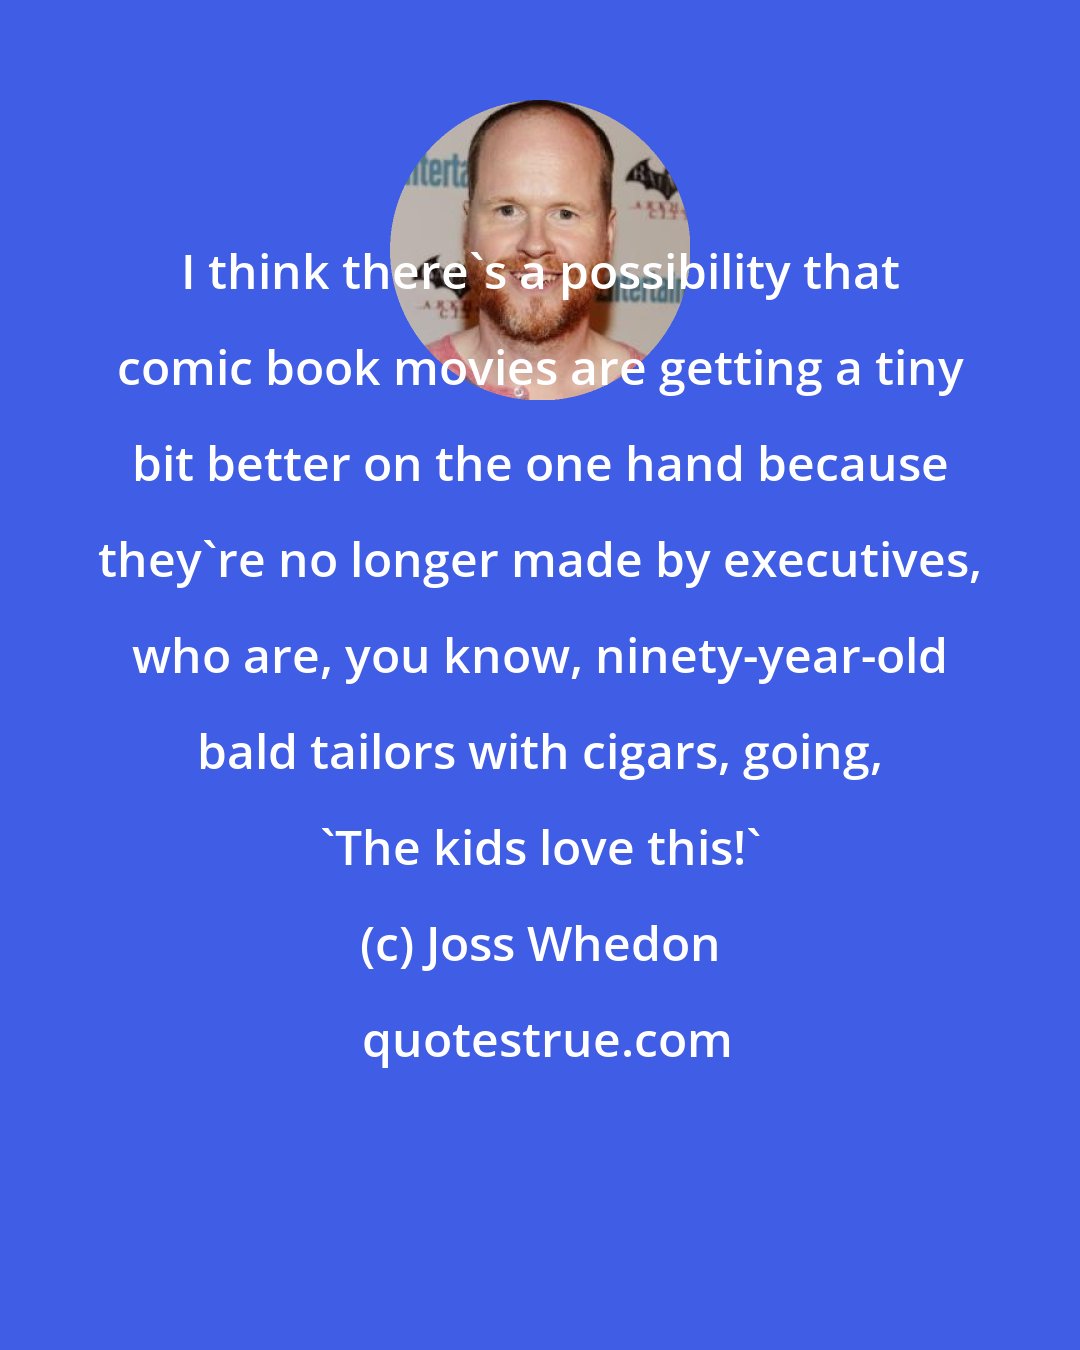 Joss Whedon: I think there's a possibility that comic book movies are getting a tiny bit better on the one hand because they're no longer made by executives, who are, you know, ninety-year-old bald tailors with cigars, going, 'The kids love this!'